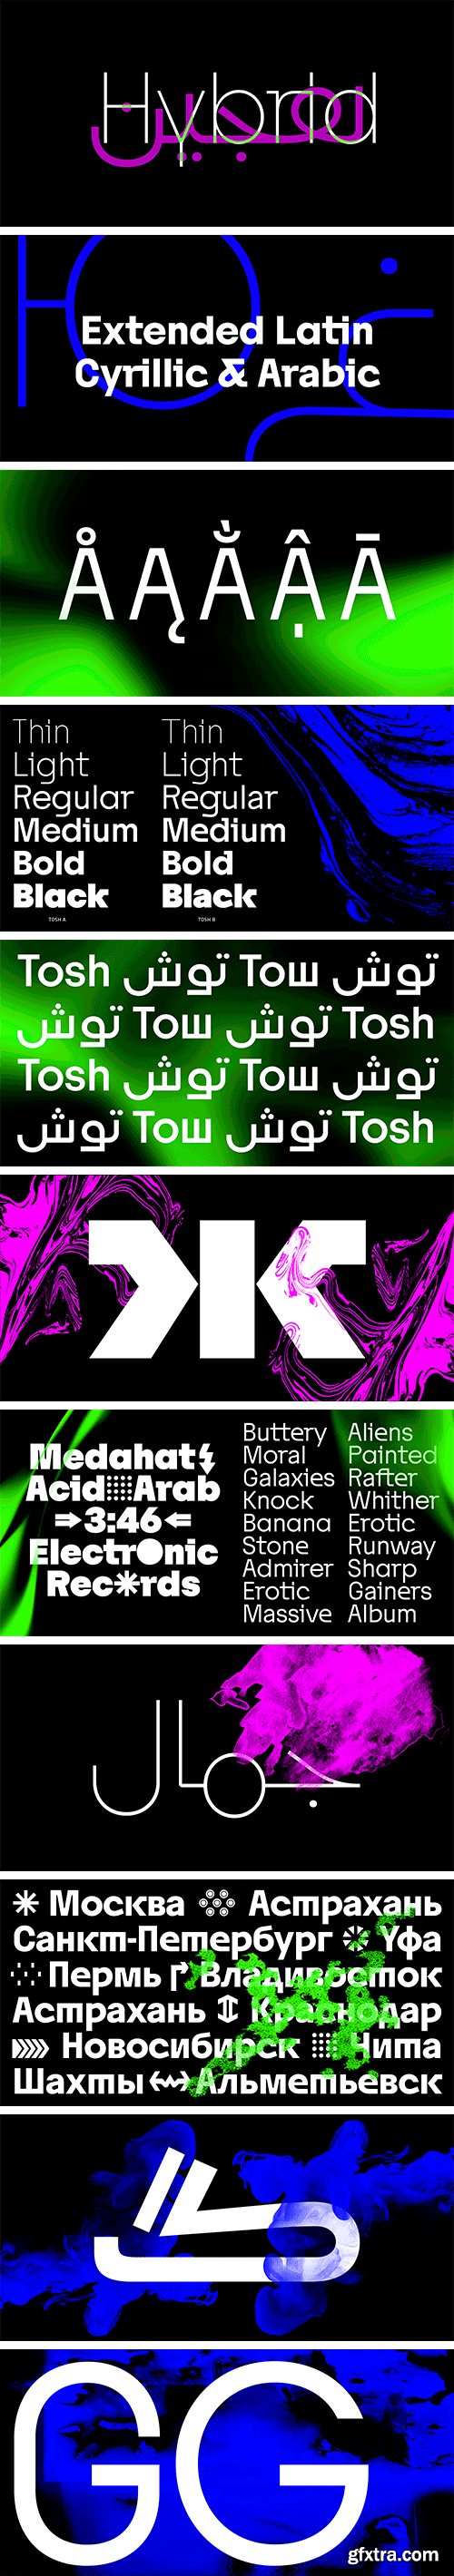 Tosh Font Family (Updated) - Latin, Cyrillic and Arabic